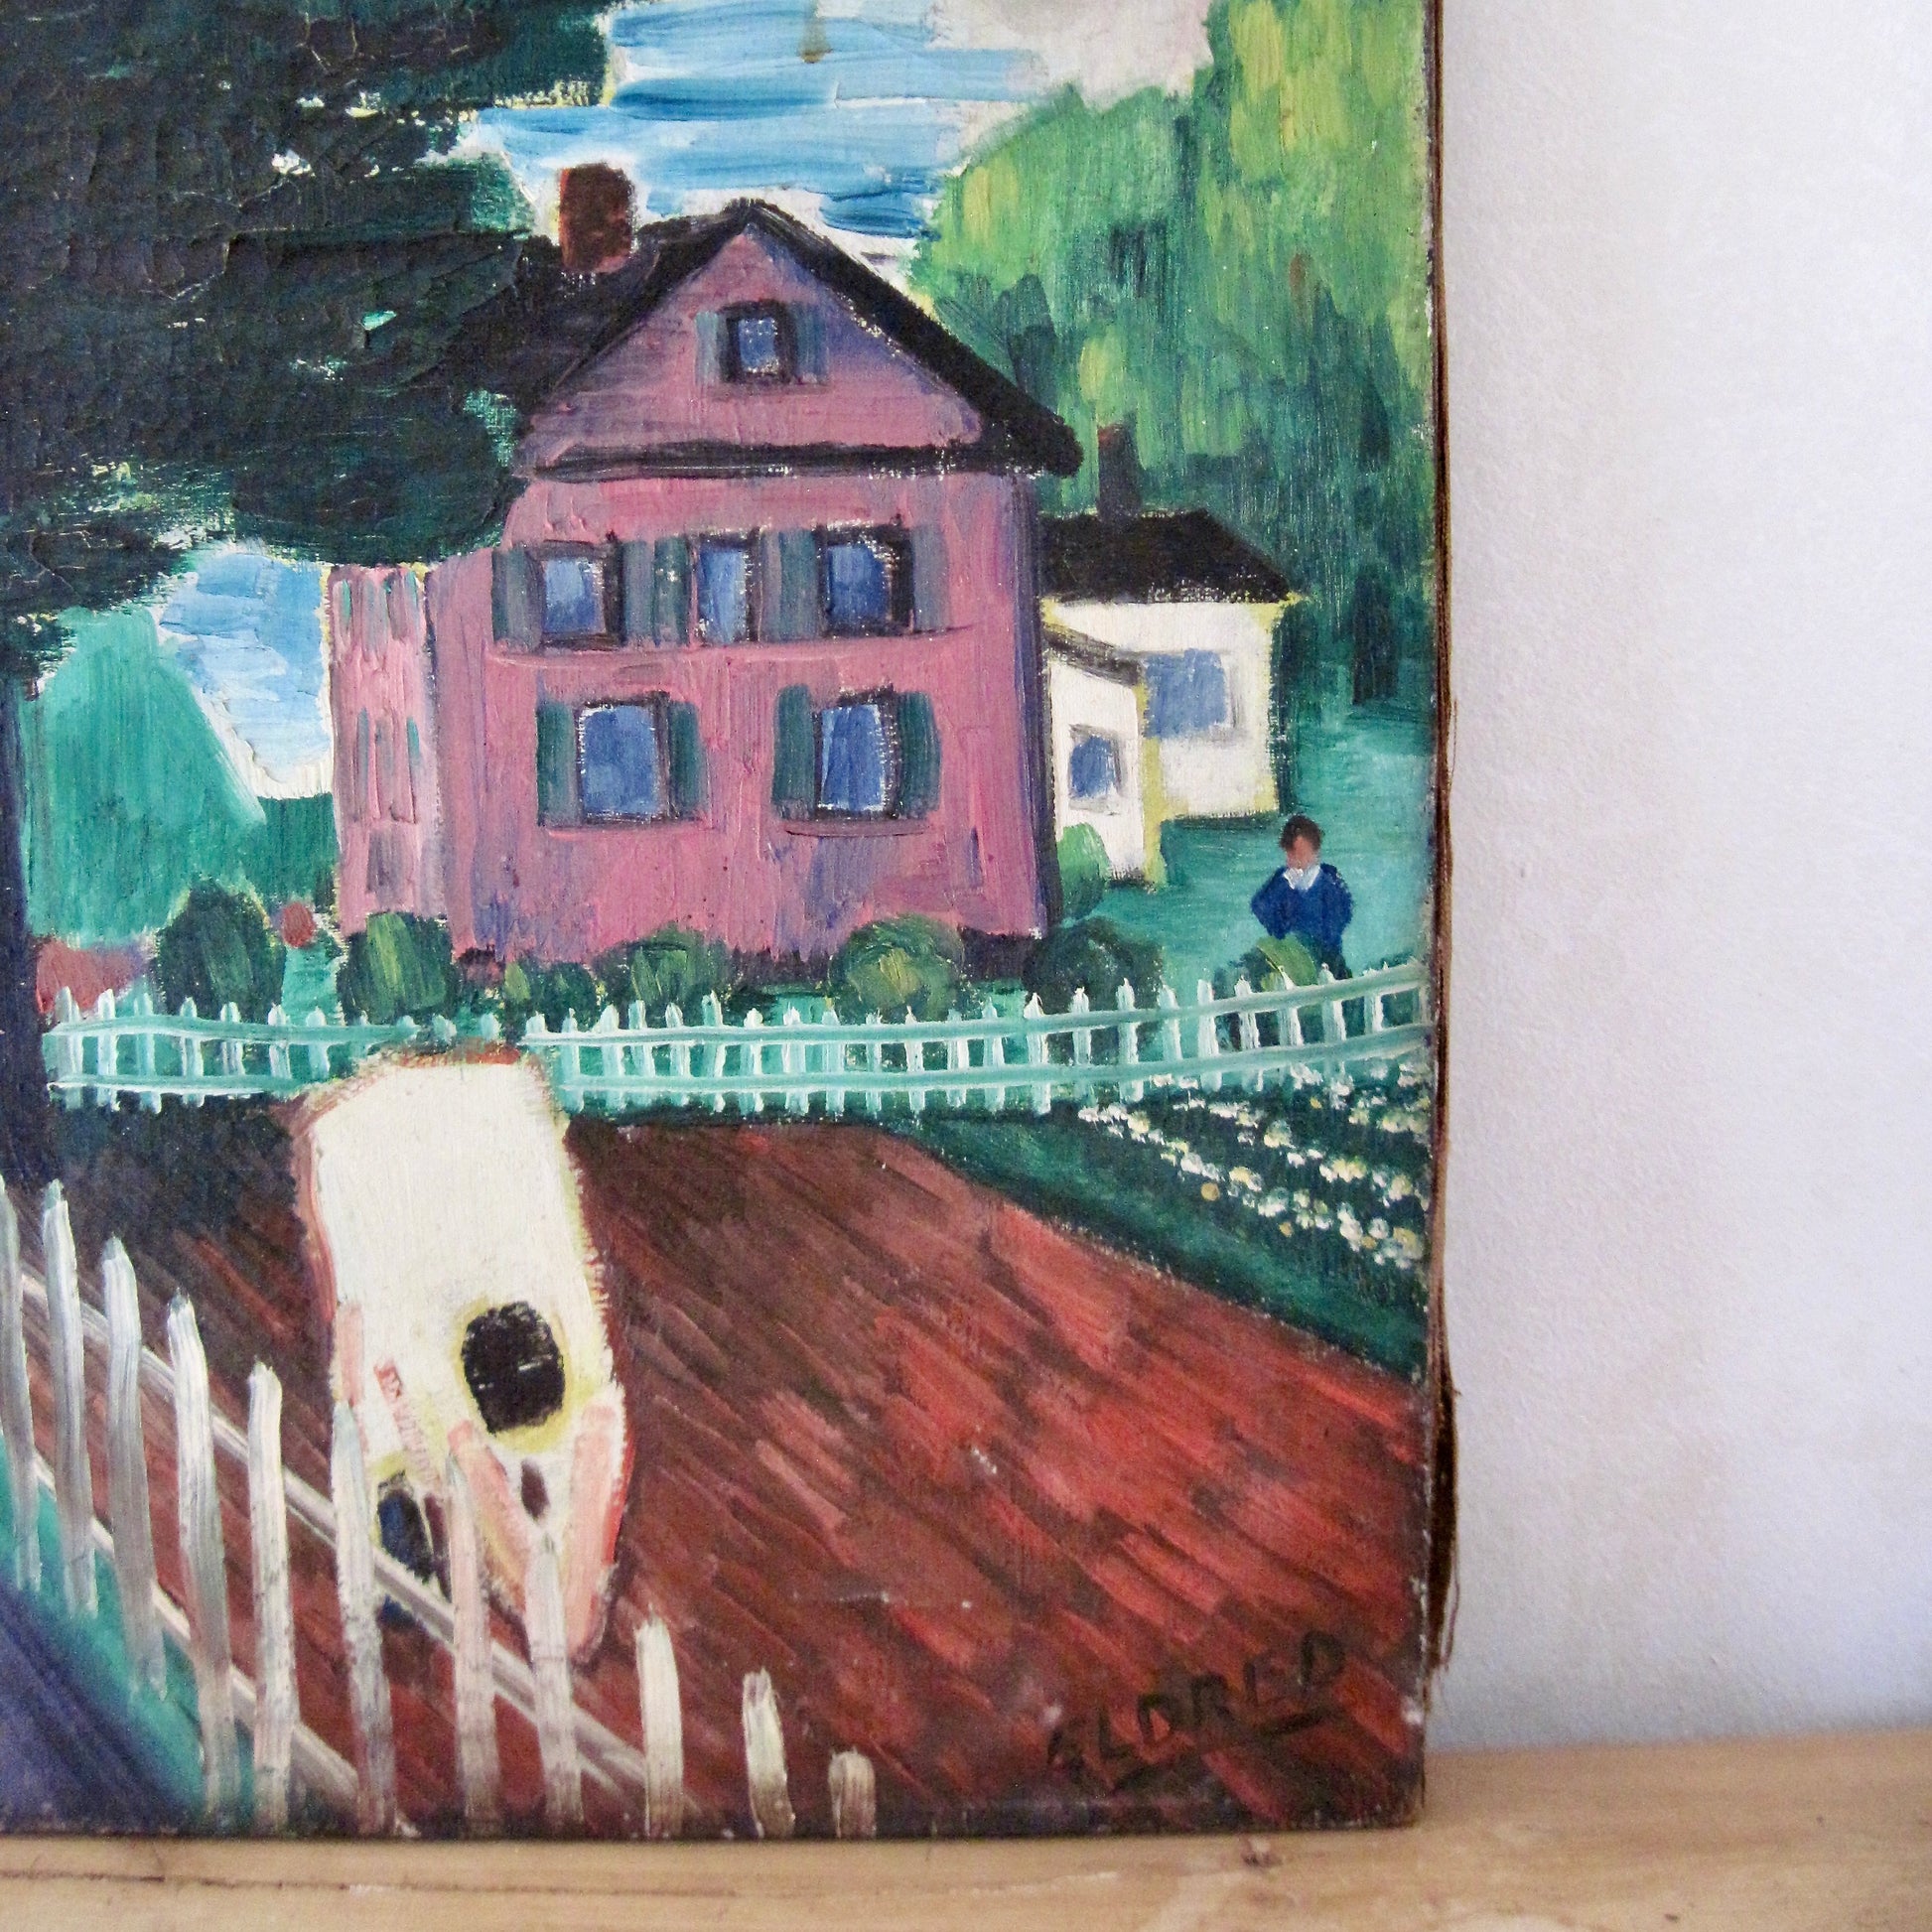 Oil Painting of Homestead Scene by Thomas B. Eldred (c.1930s)